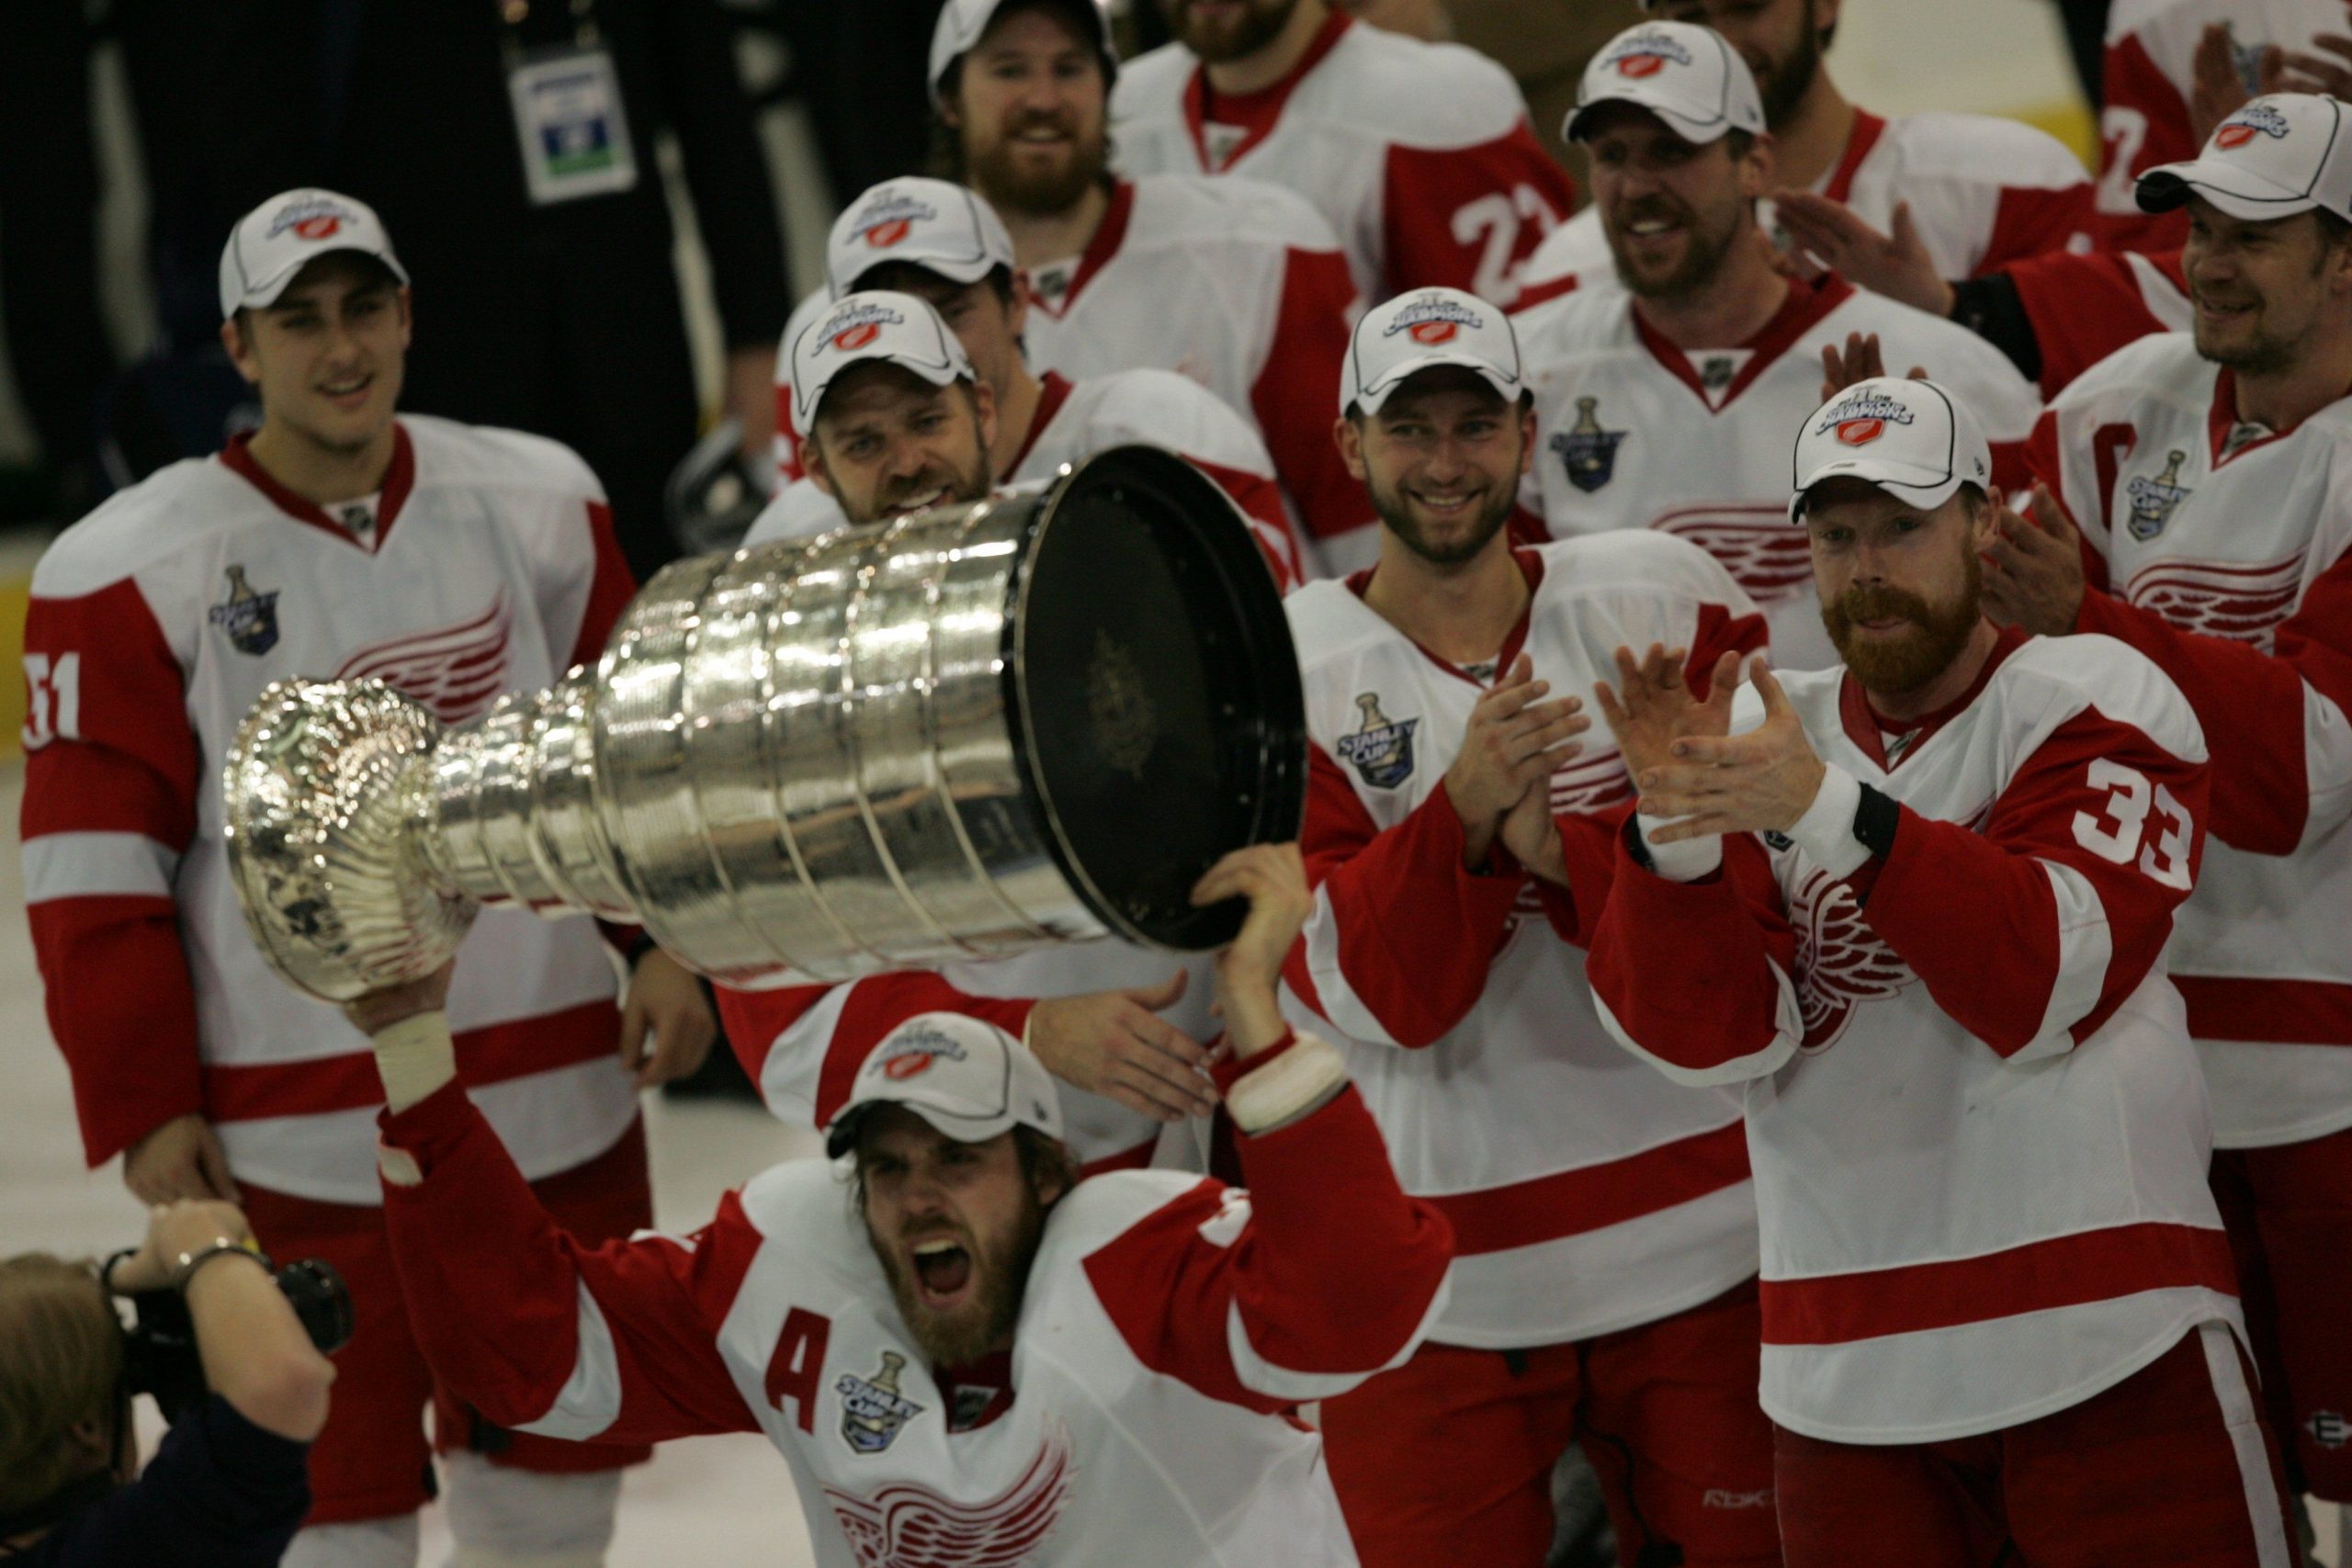 Henrik Zetterberg lifts the Stanley Cup with the Detroit Red Wings